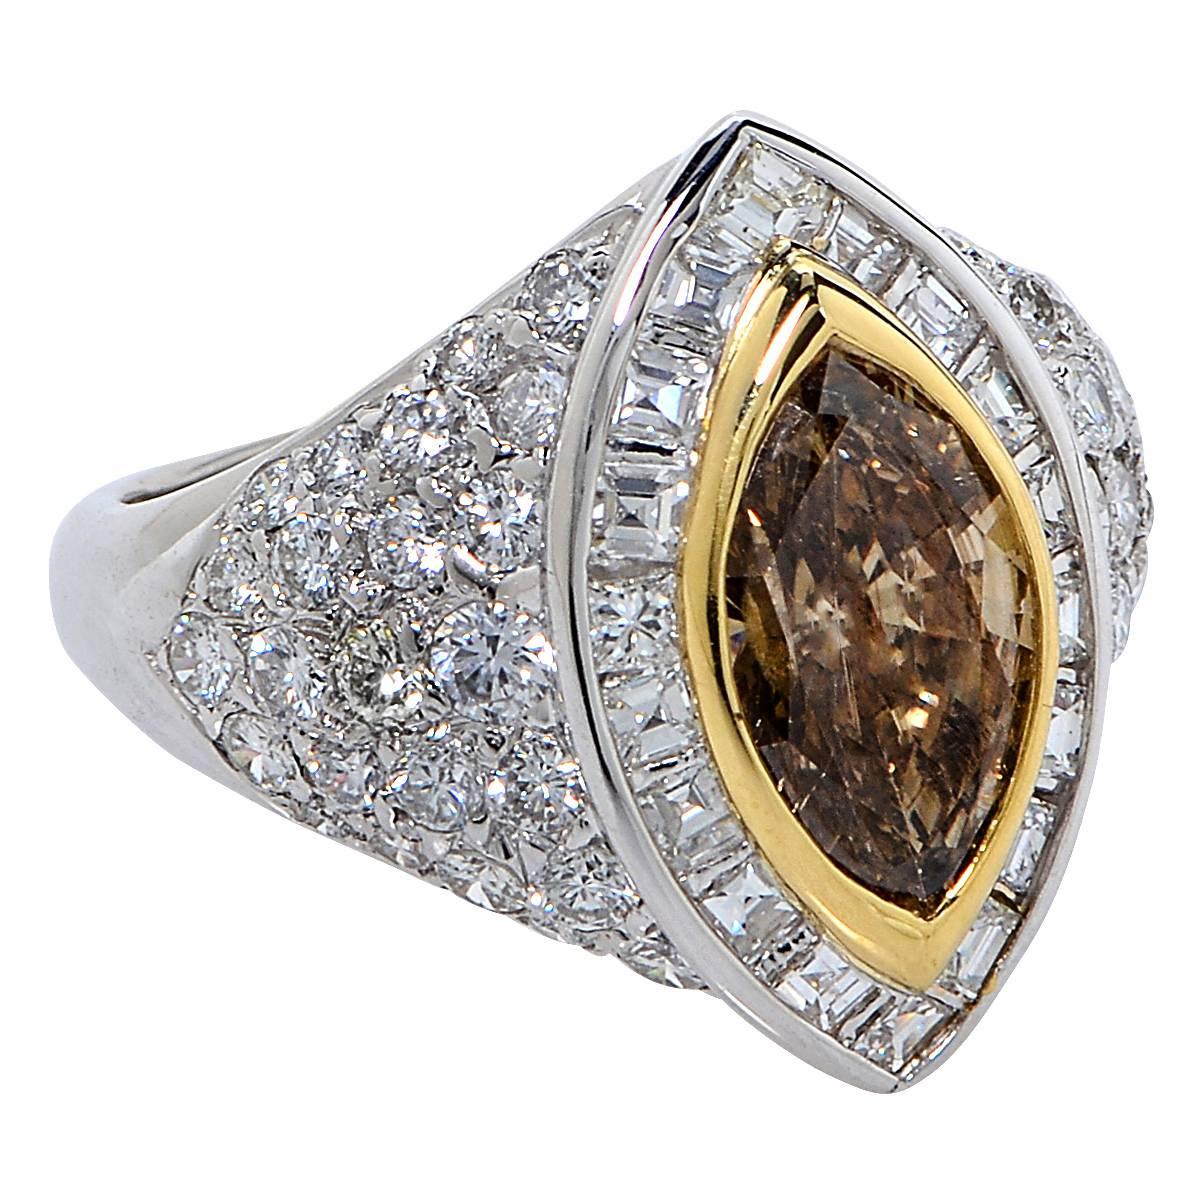 2.50 Carat Natural Fancy Brownish Yellow Diamond Set in to an 18 Karat White and Yellow Gold Ring Surrounded by 66 Mixed Cut Diamonds Weighing Approximately 3.00 Carats, F Color, VS Clarity.

Ring Size: 8.75
Weight: 9.11 grams

This Natural